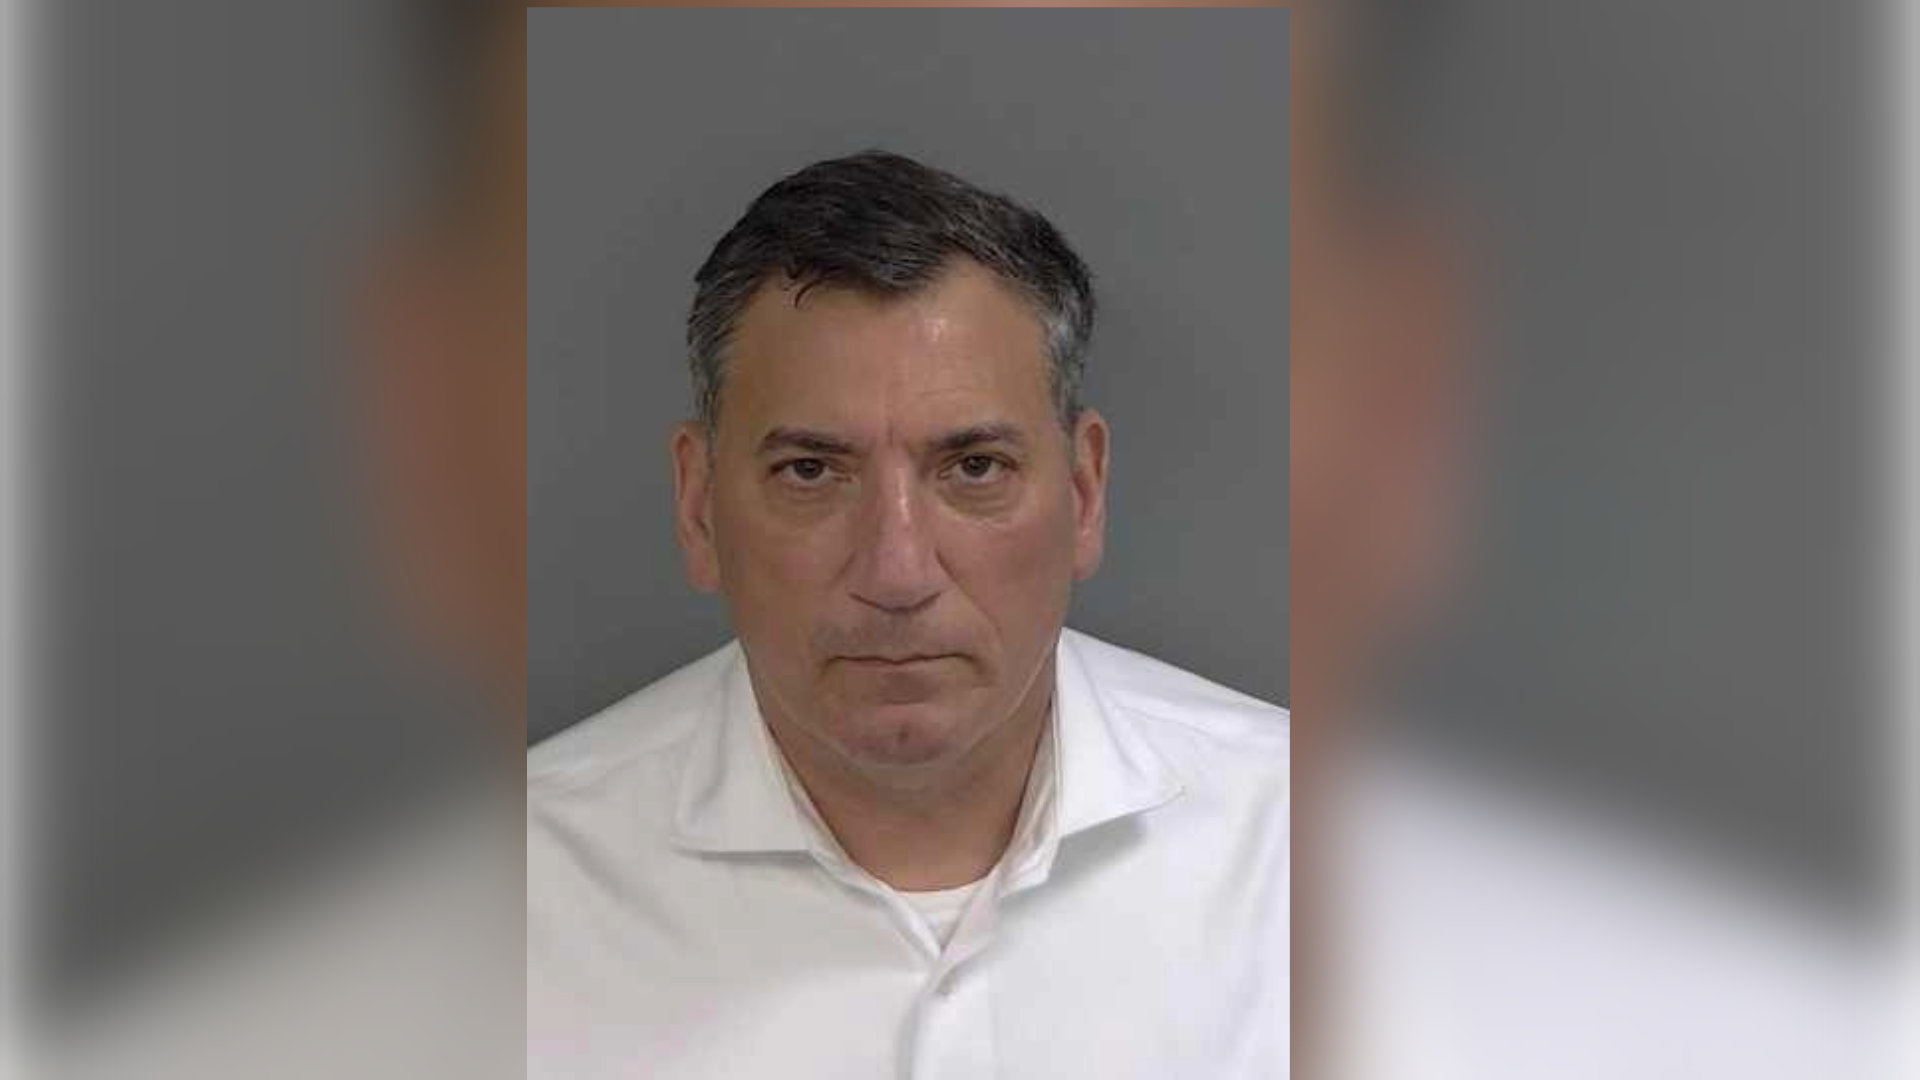 Collier County Commissioner accused of attacking ex-girlfriend scheduled to appear in court